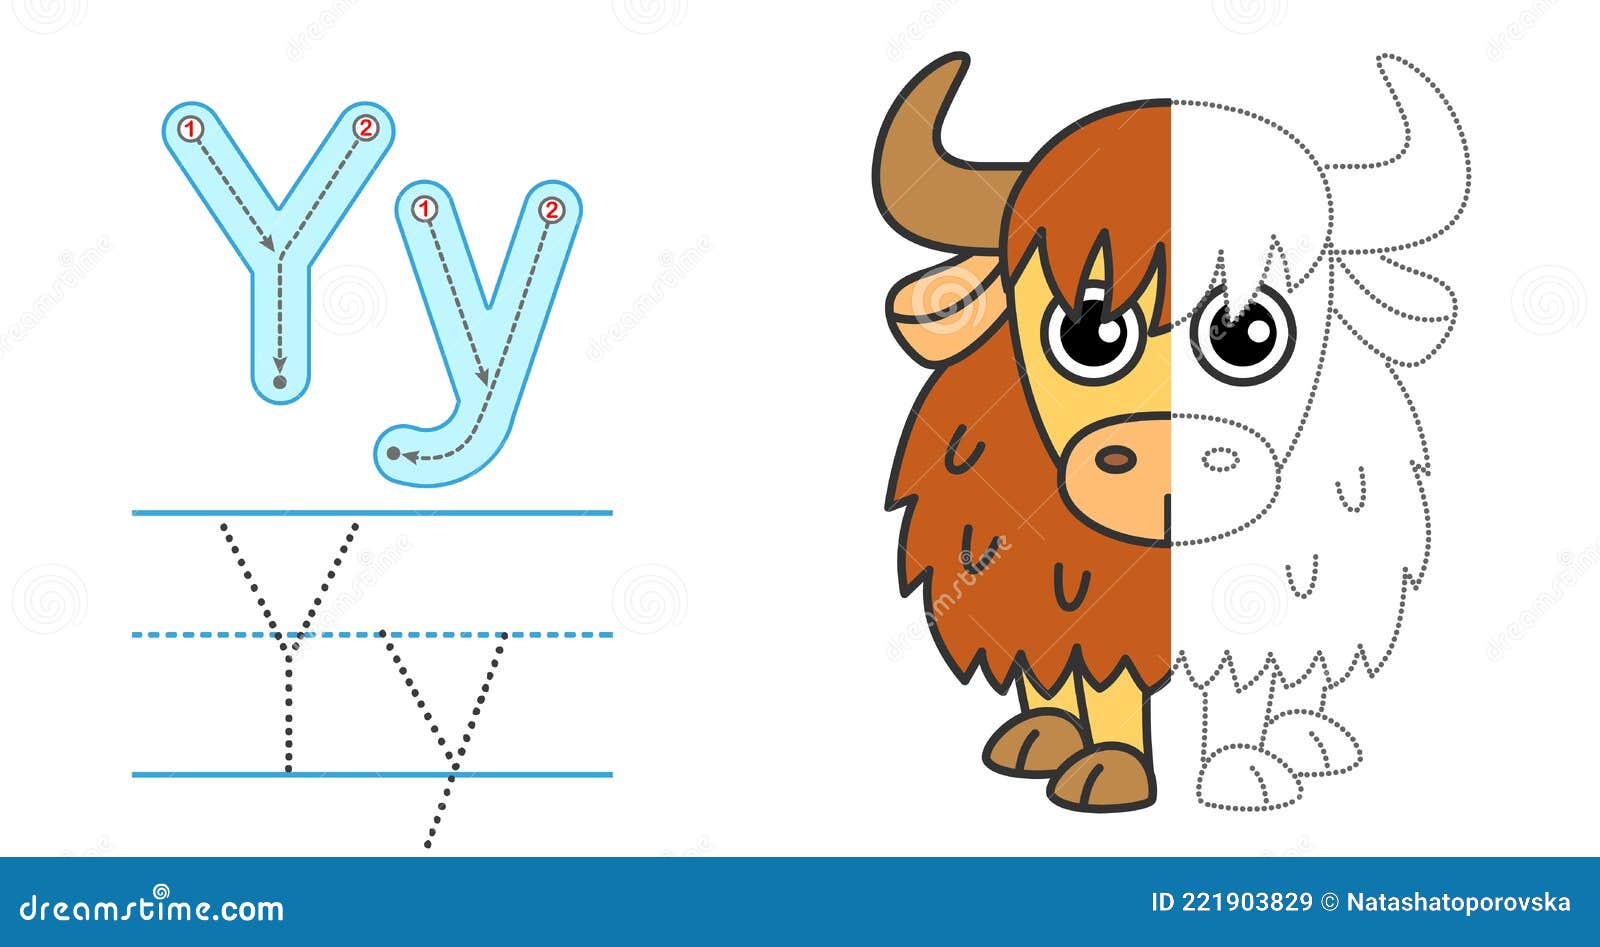 trace the letter and picture and color it. educational children tracing game. coloring alphabet. letter y and funny yak